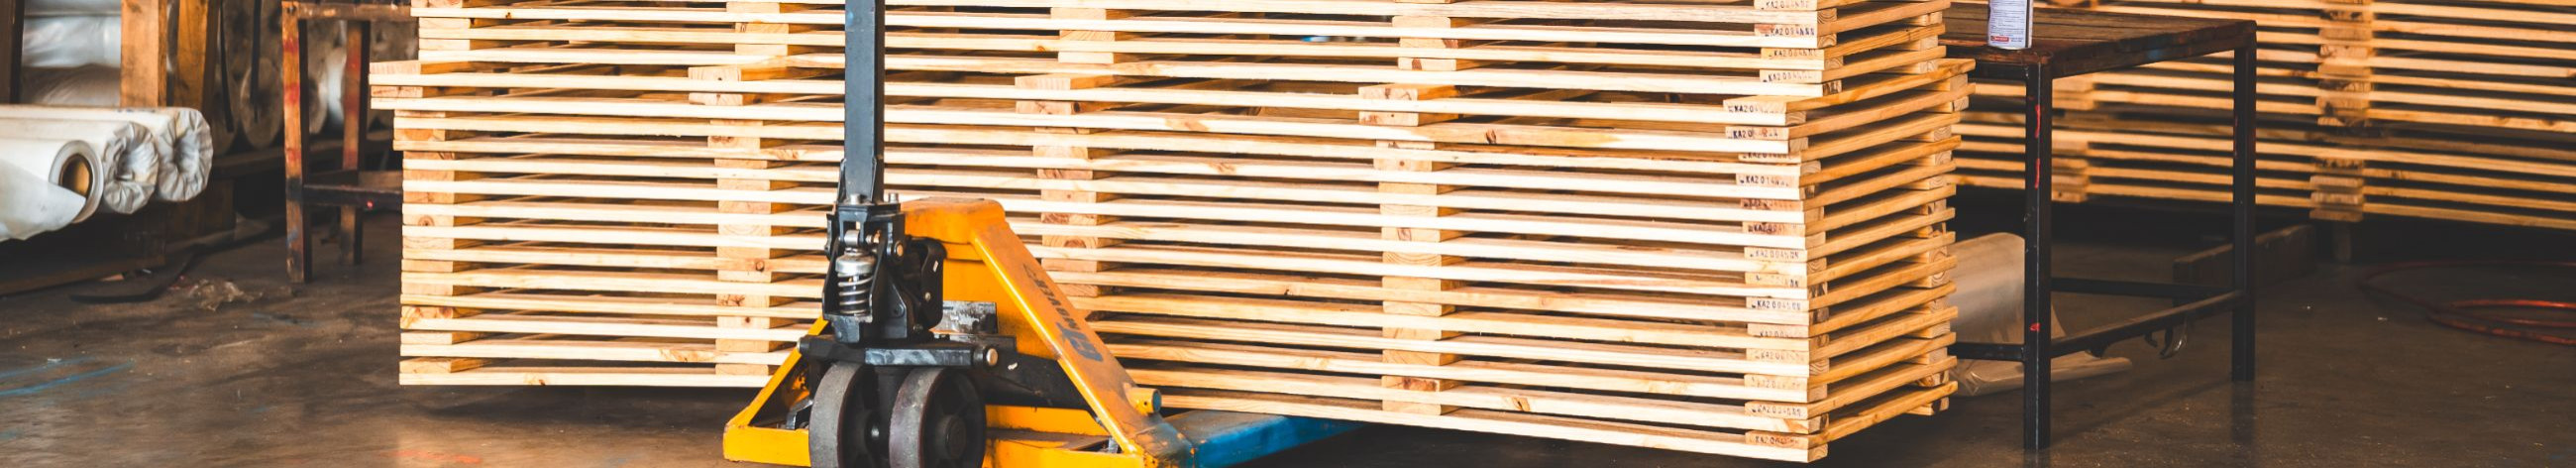 wood products, pallet collars and accessories, transportation of goods services, sawmill for pallet production, product protection packaging, used pallets buy and sell, wooden storage products, packaging solutions, corrugated bases, Wooden products